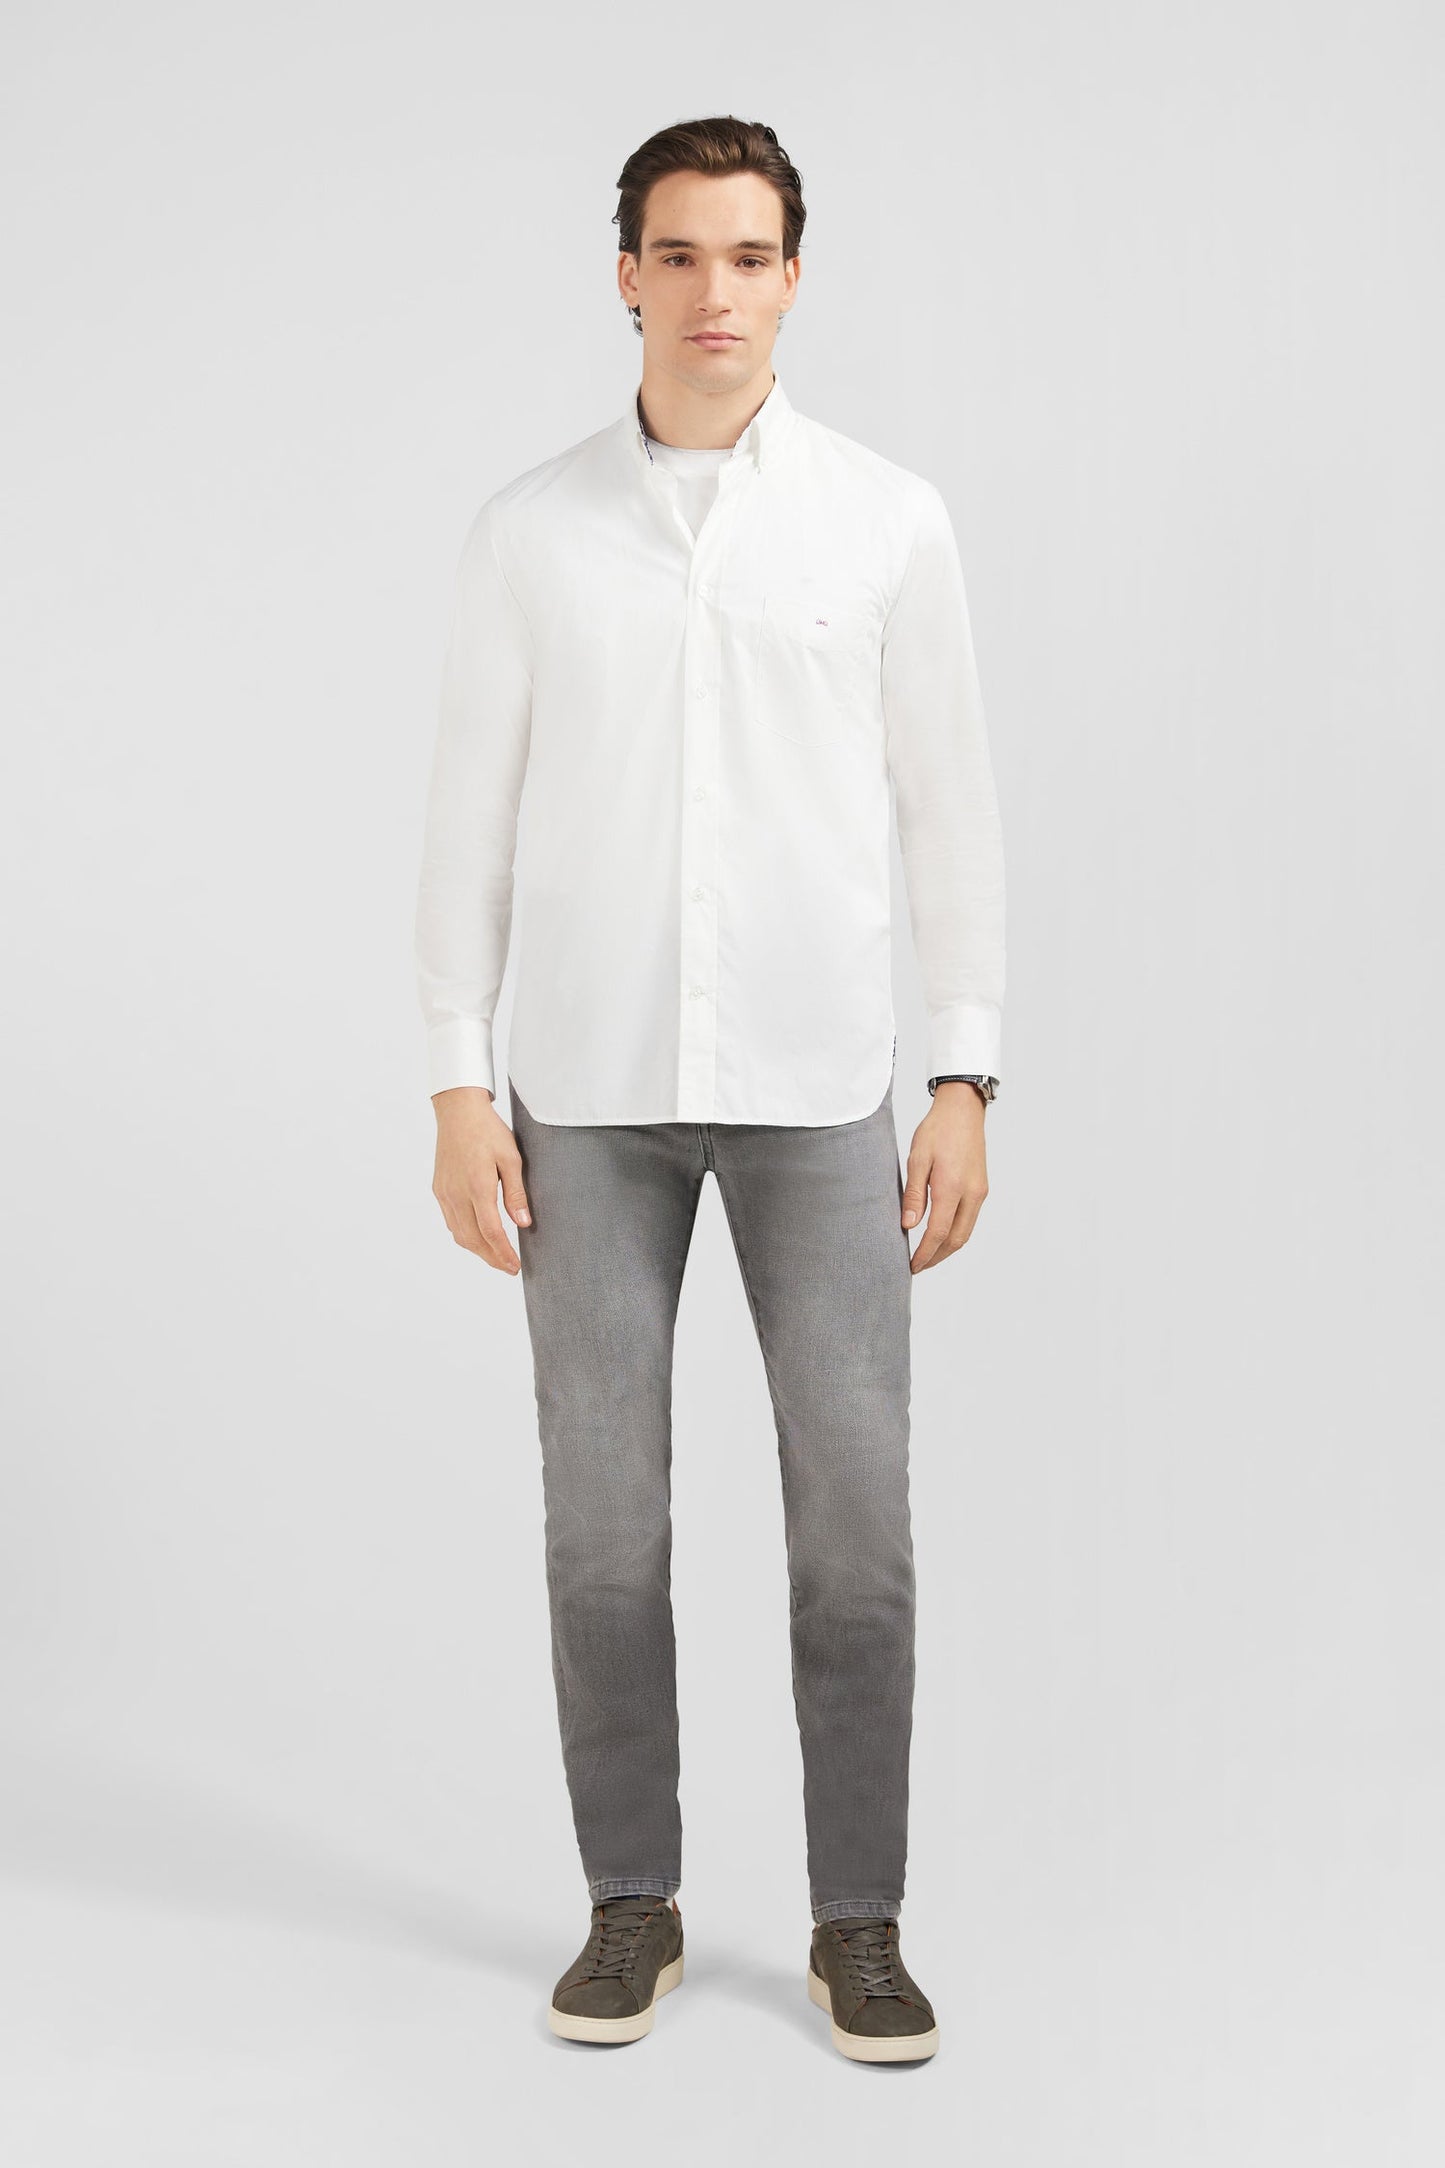 White shirt with floral elbow patches - Image 3